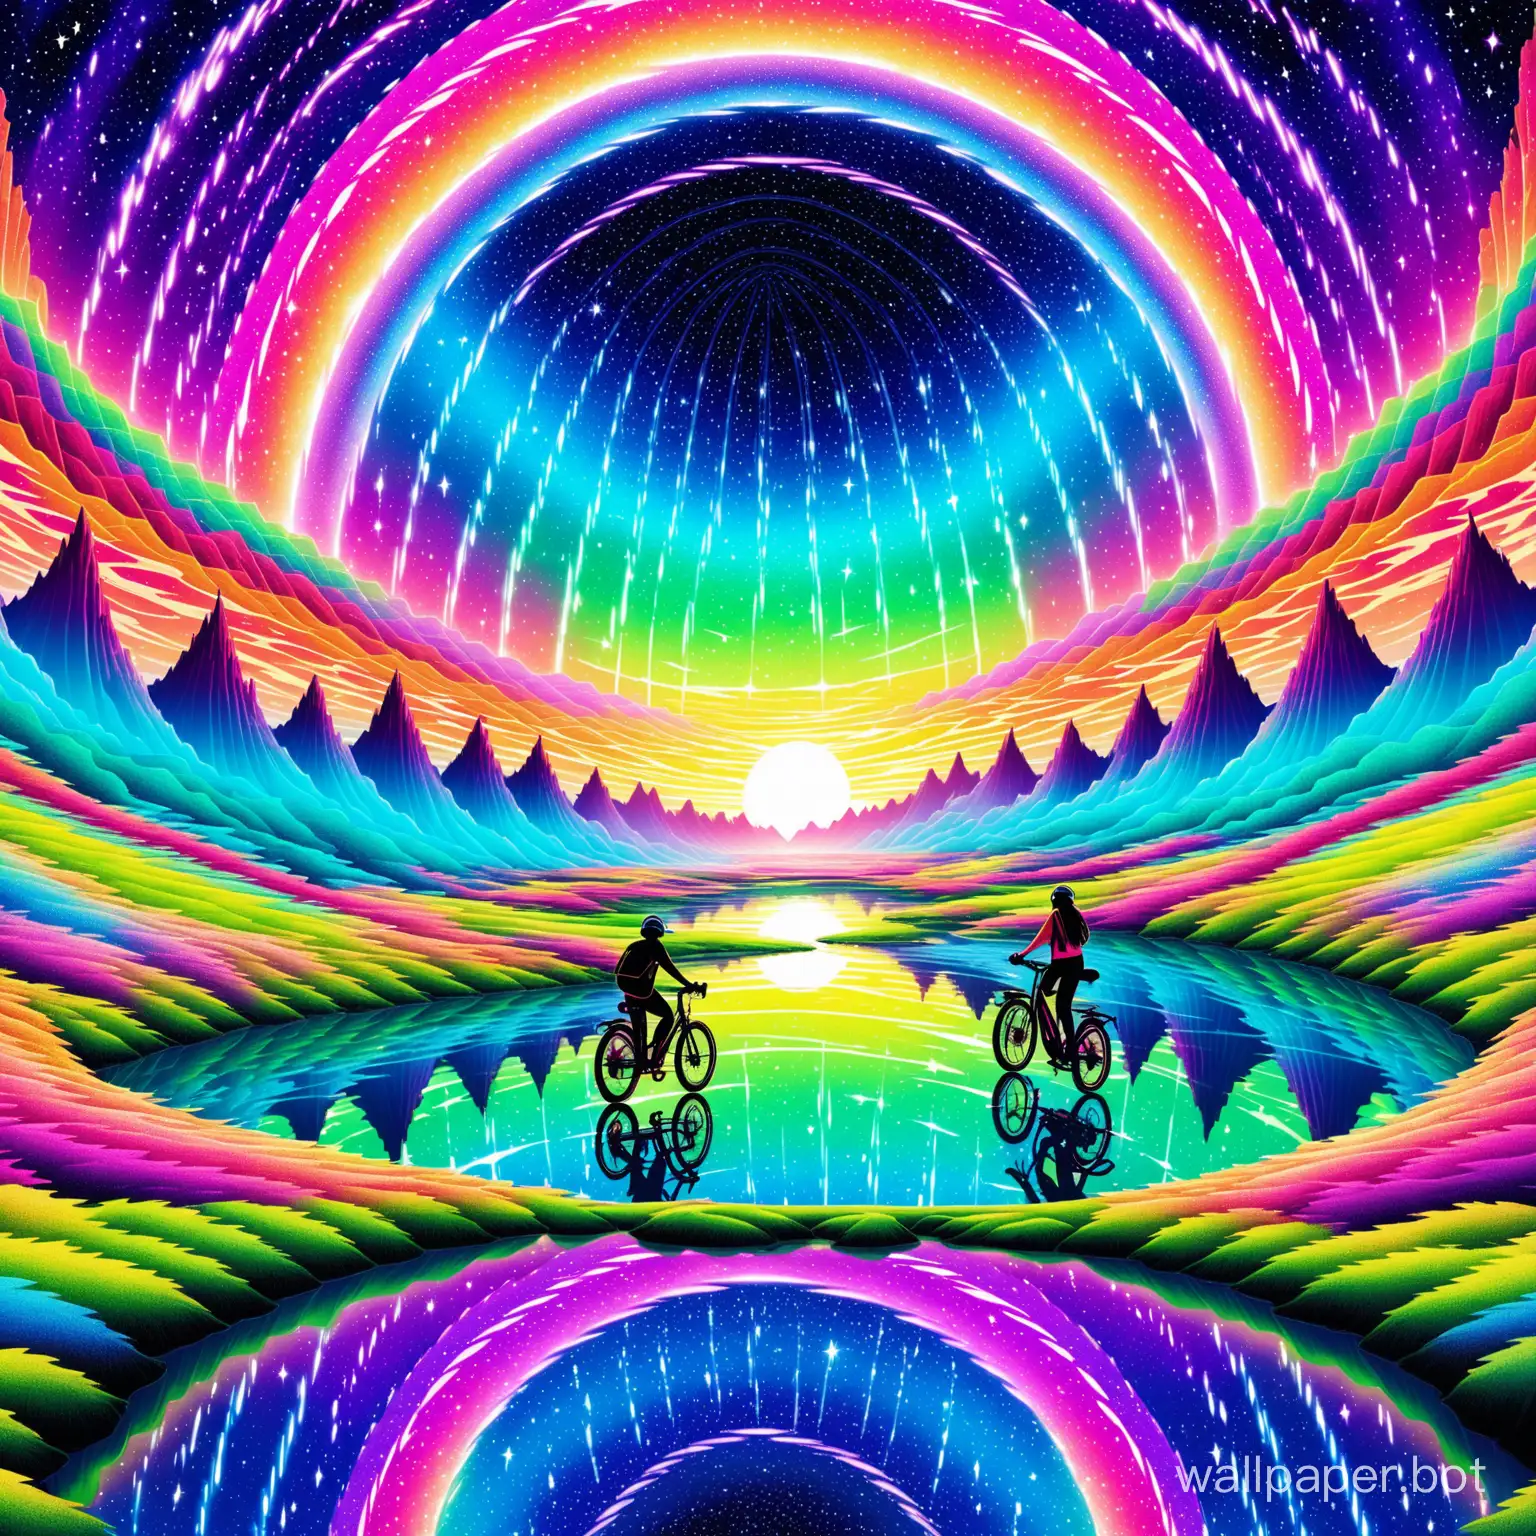 Psychedelic river of stars with a ebike  waterfall and a trippy lake in a trippy valley between crazy mirror psychedelic mountains under a giant mirror